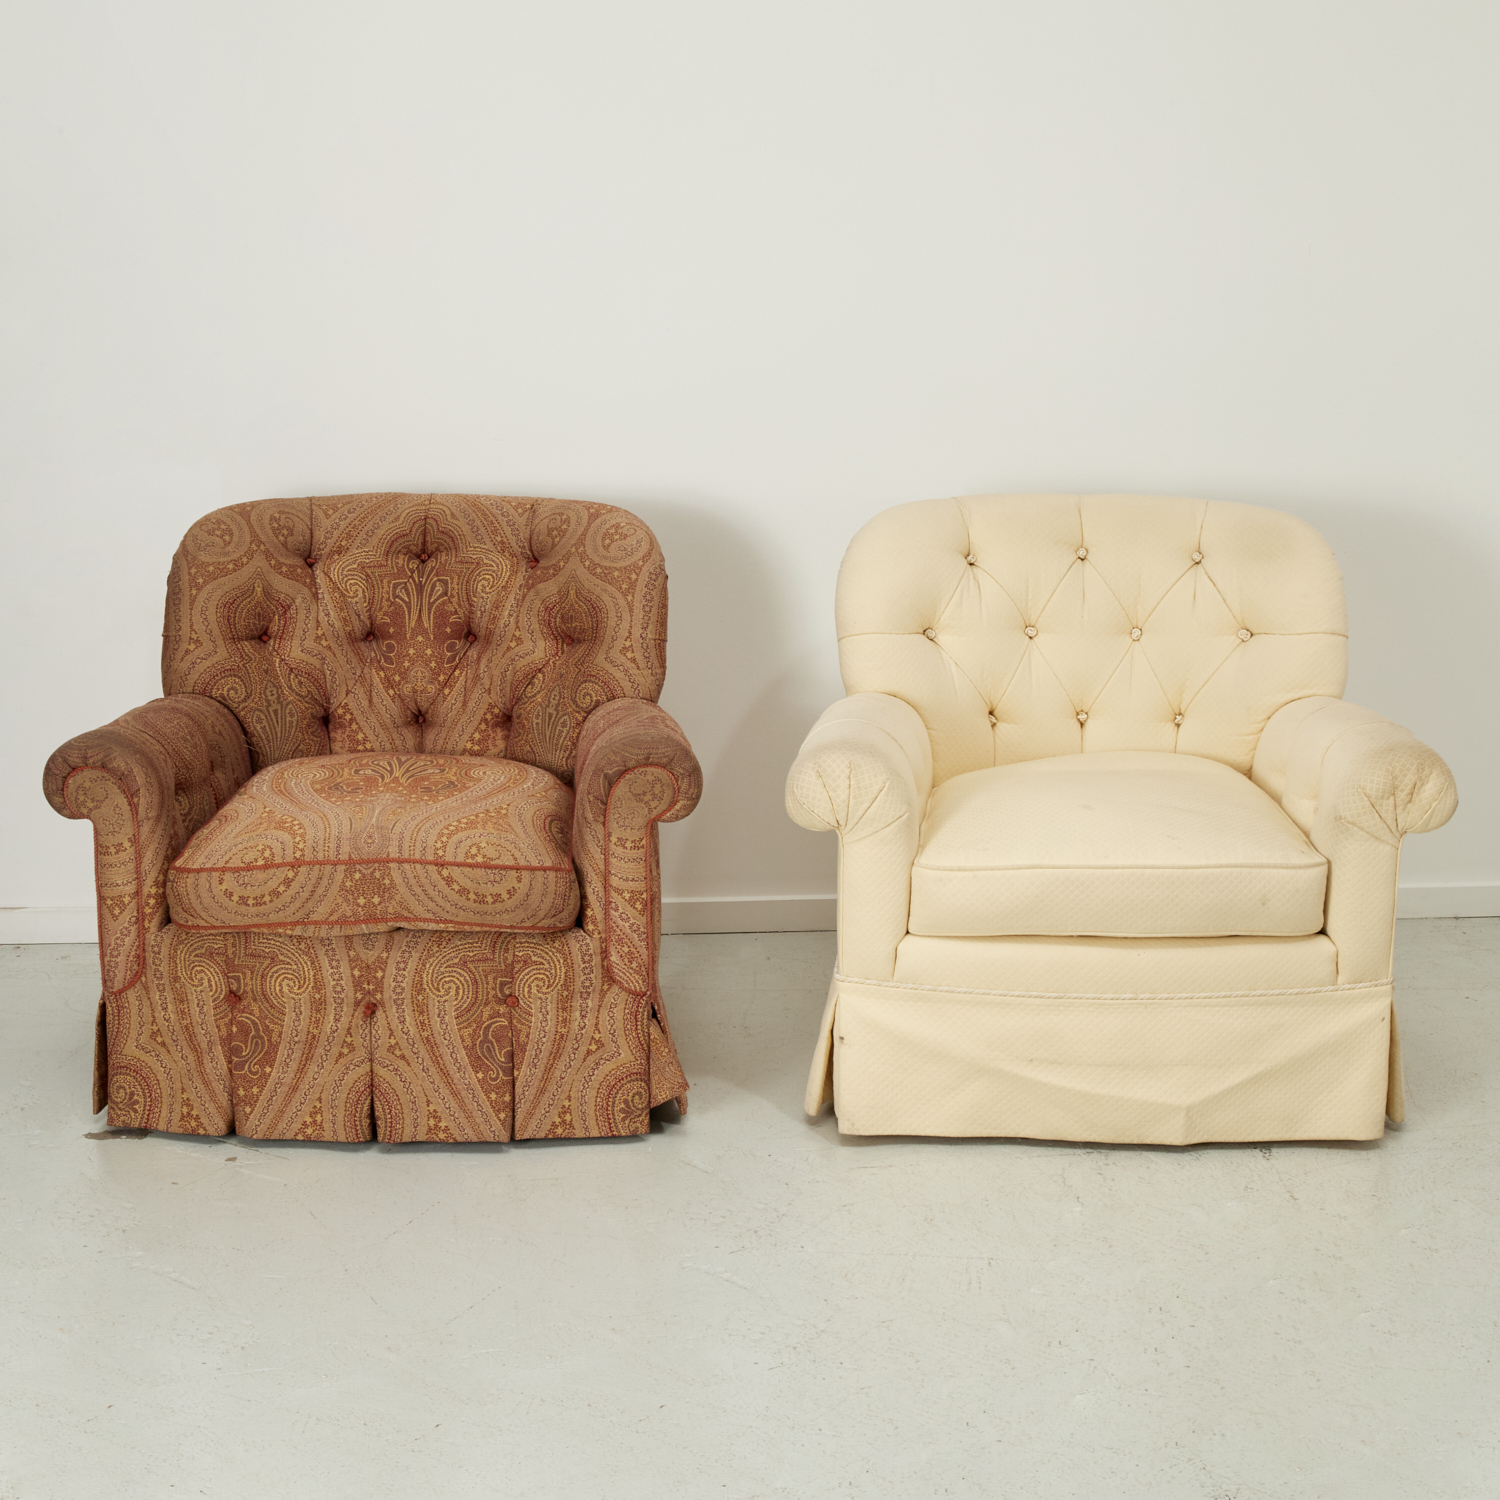 NEAR PAIR TUFTED UPHOLSTERED CLUB